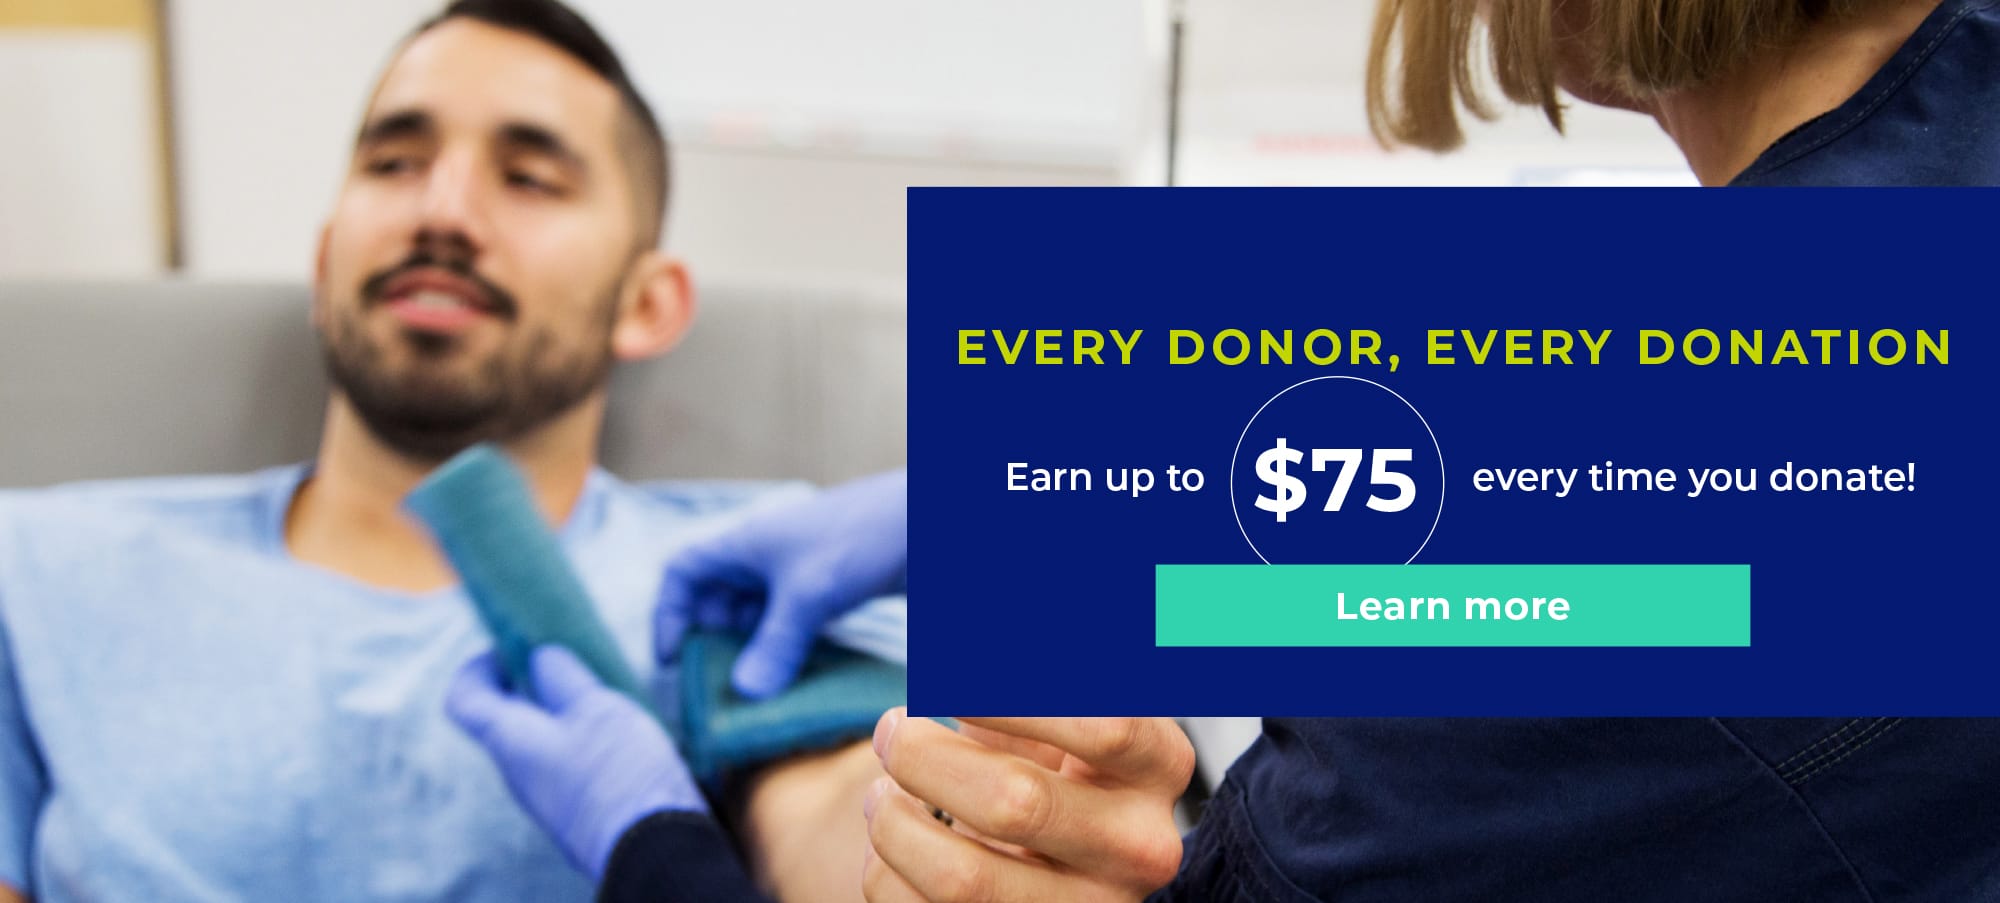 Earn up to $75 every time you donate!